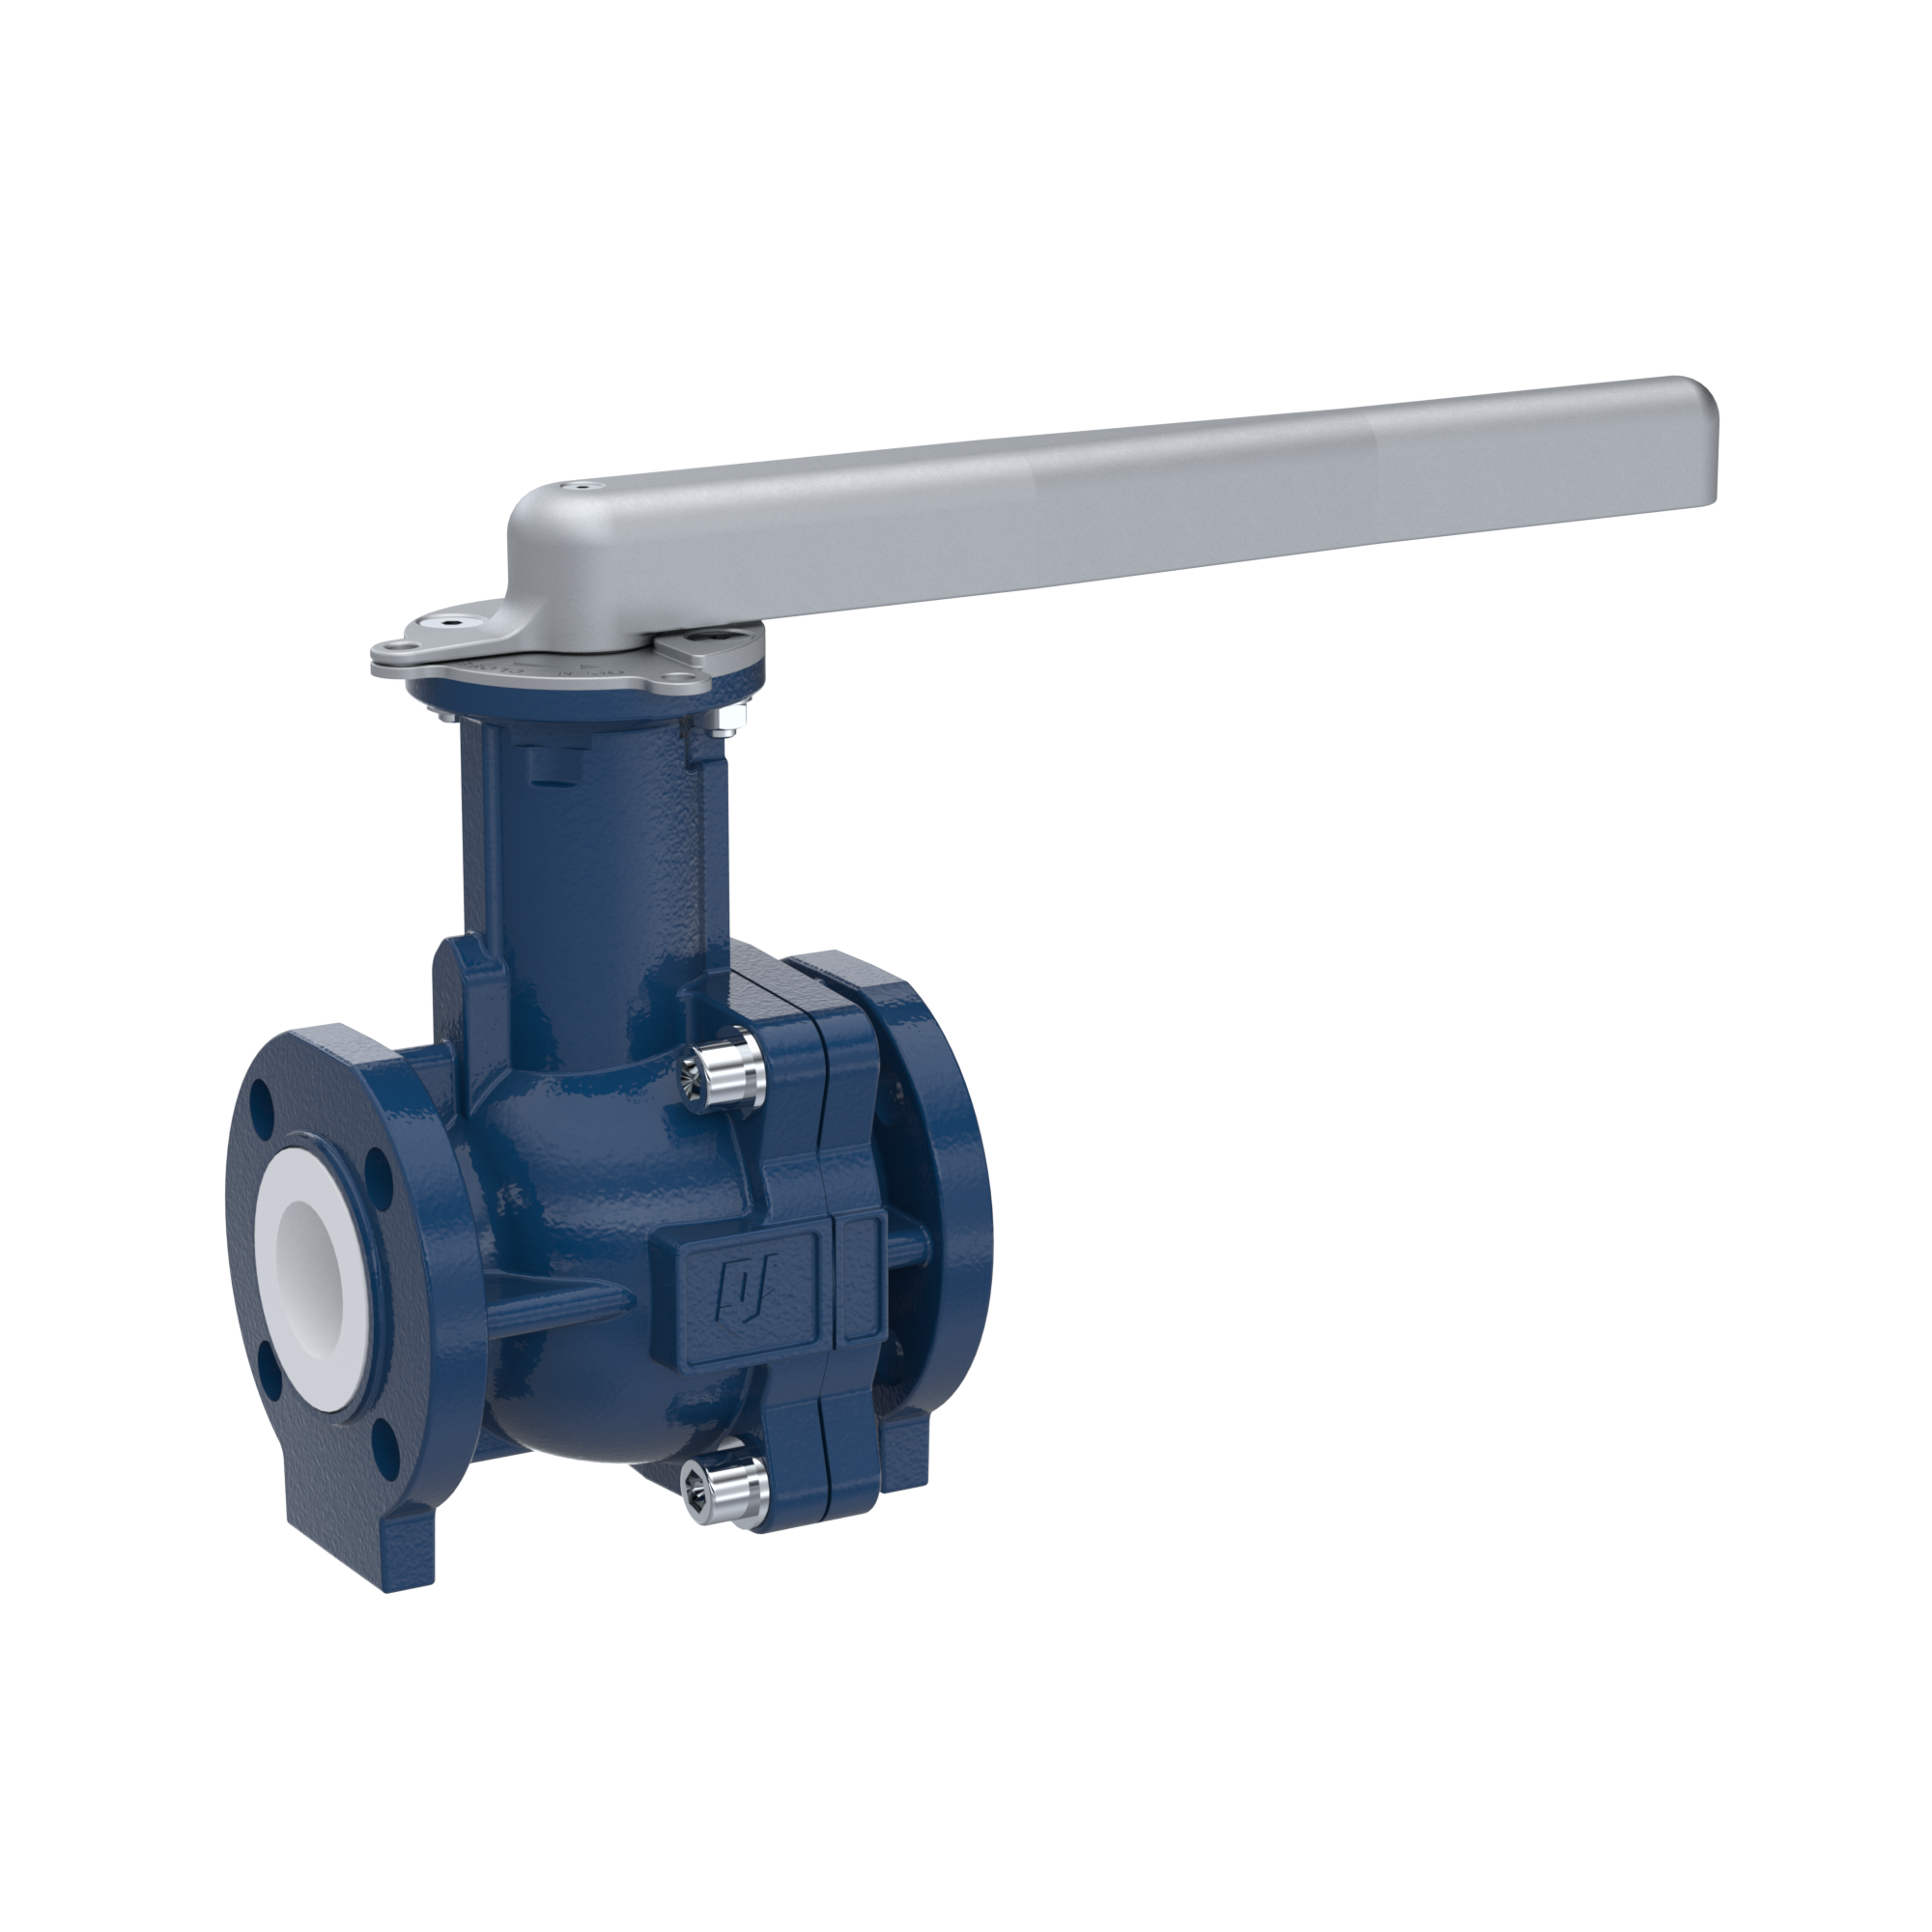 PFA-flange ball valve FK13 DN15 - 1/2" inch ANSI 150 made of spheroidal graphite cast iron with lever hand